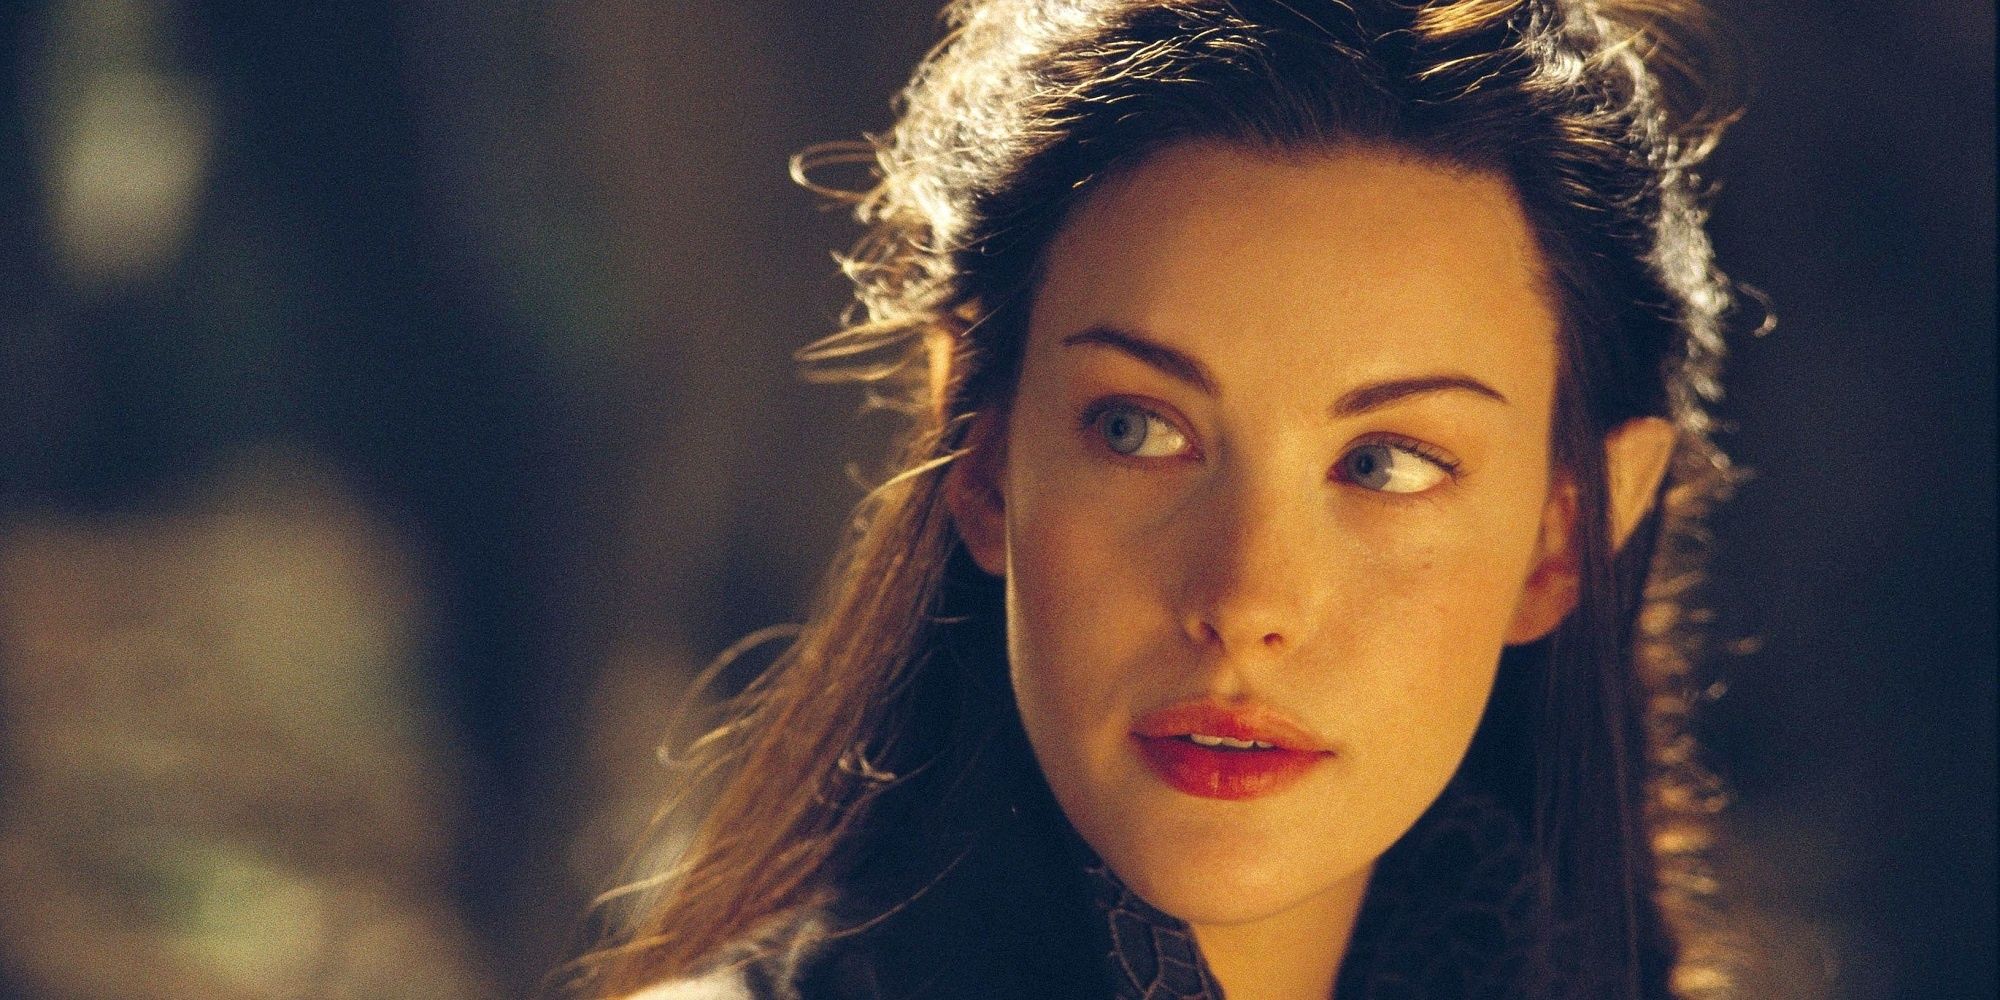 Arwen in The Lord of the Rings, played by Live Tyler.